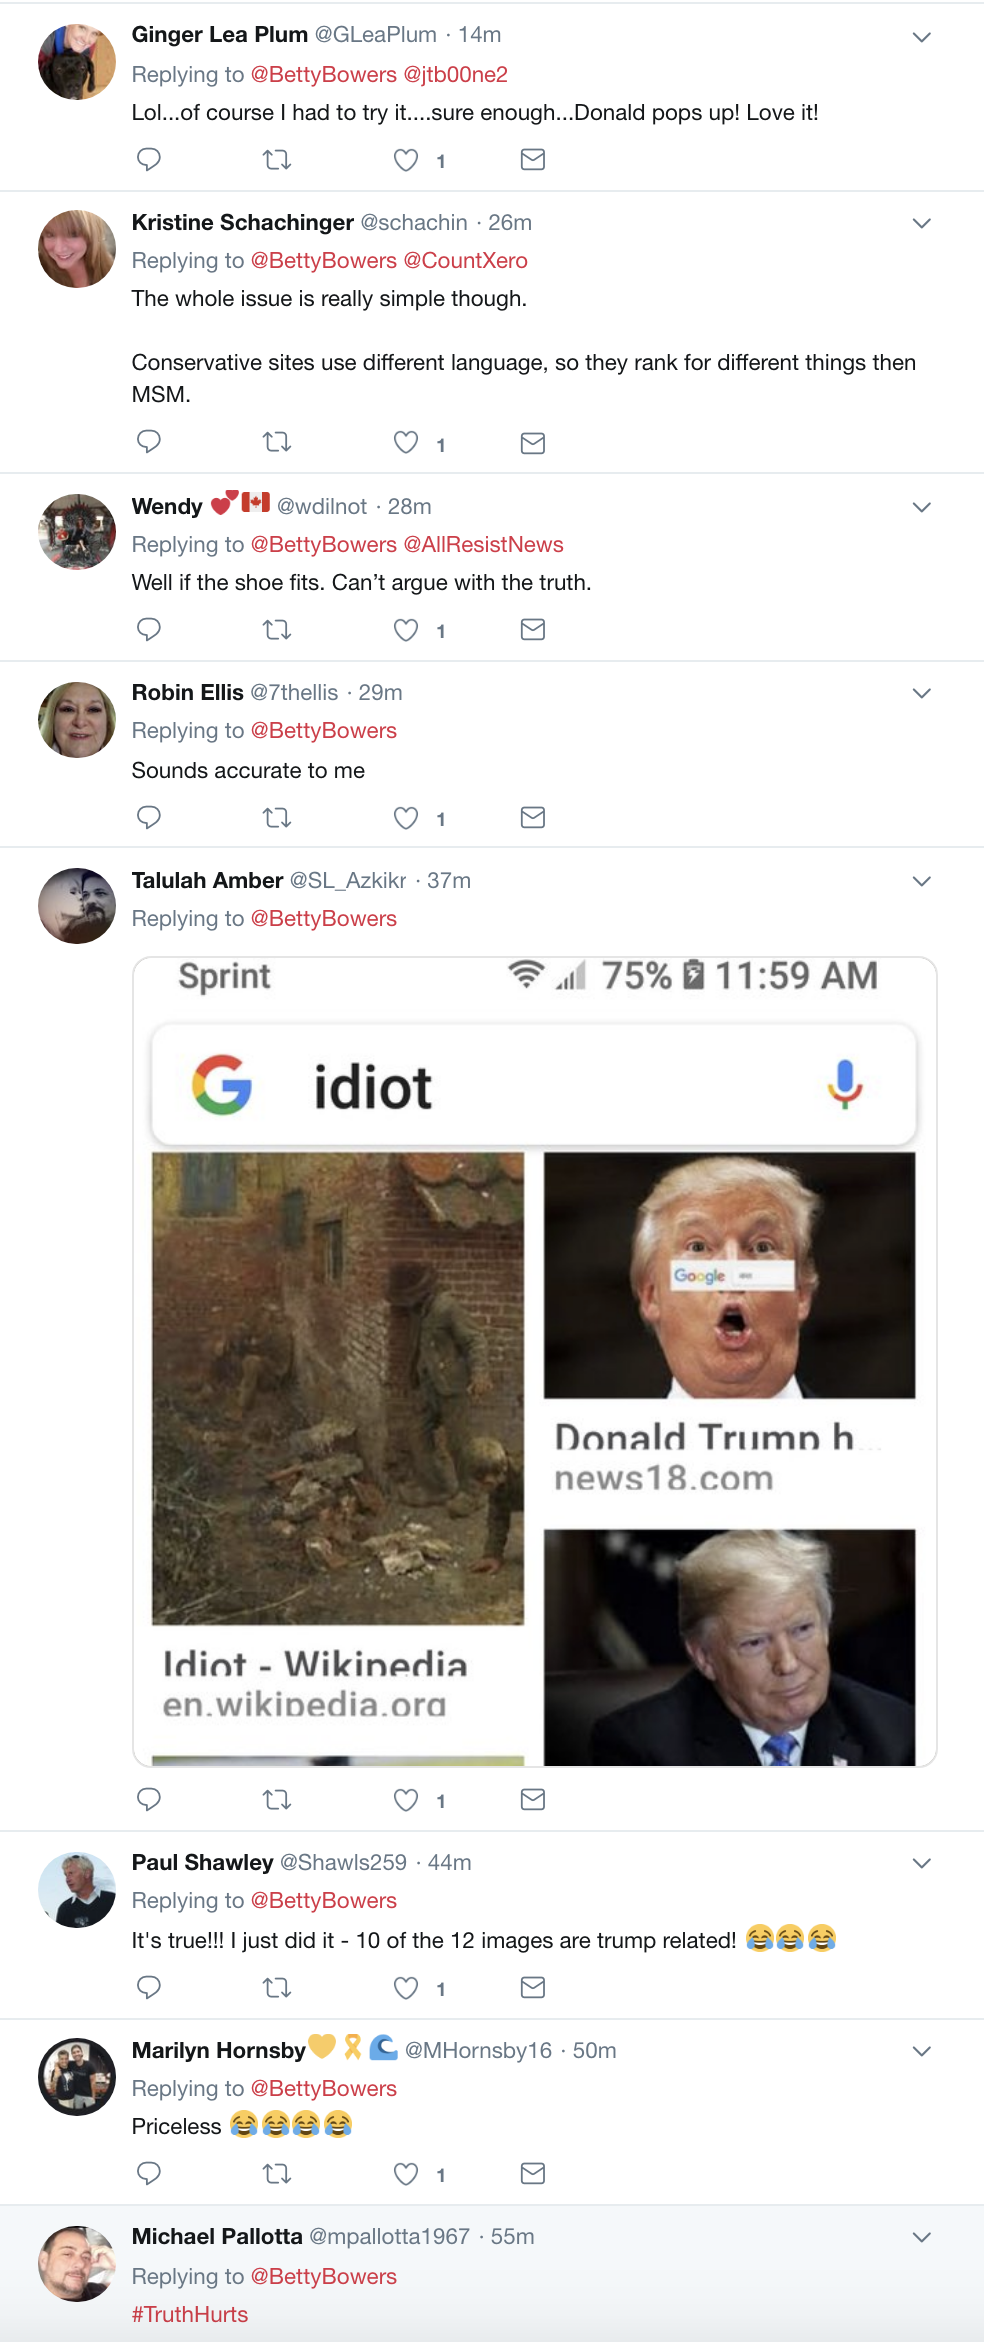 Screen-Shot-2018-12-11-at-12.20.49-PM Google CEO Explains Why Trump Shows In Search Results For 'Idiot' - GOP Gets Owned Donald Trump Economy Politics Social Media The Internet Top Stories 